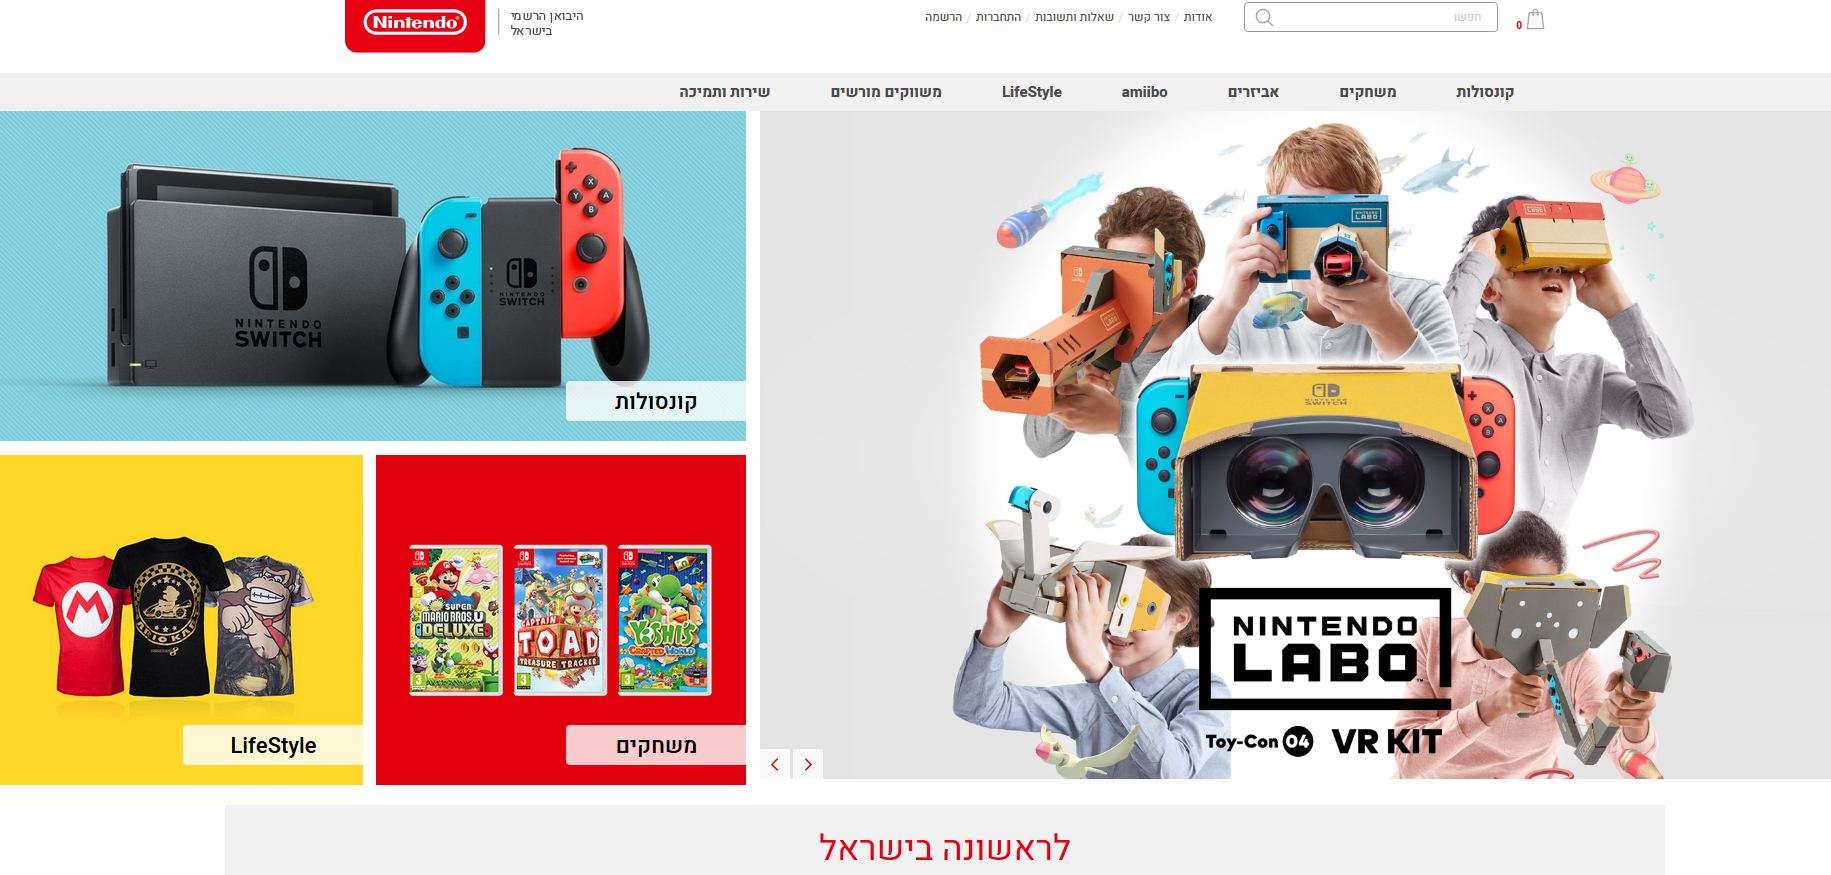 switch online store games